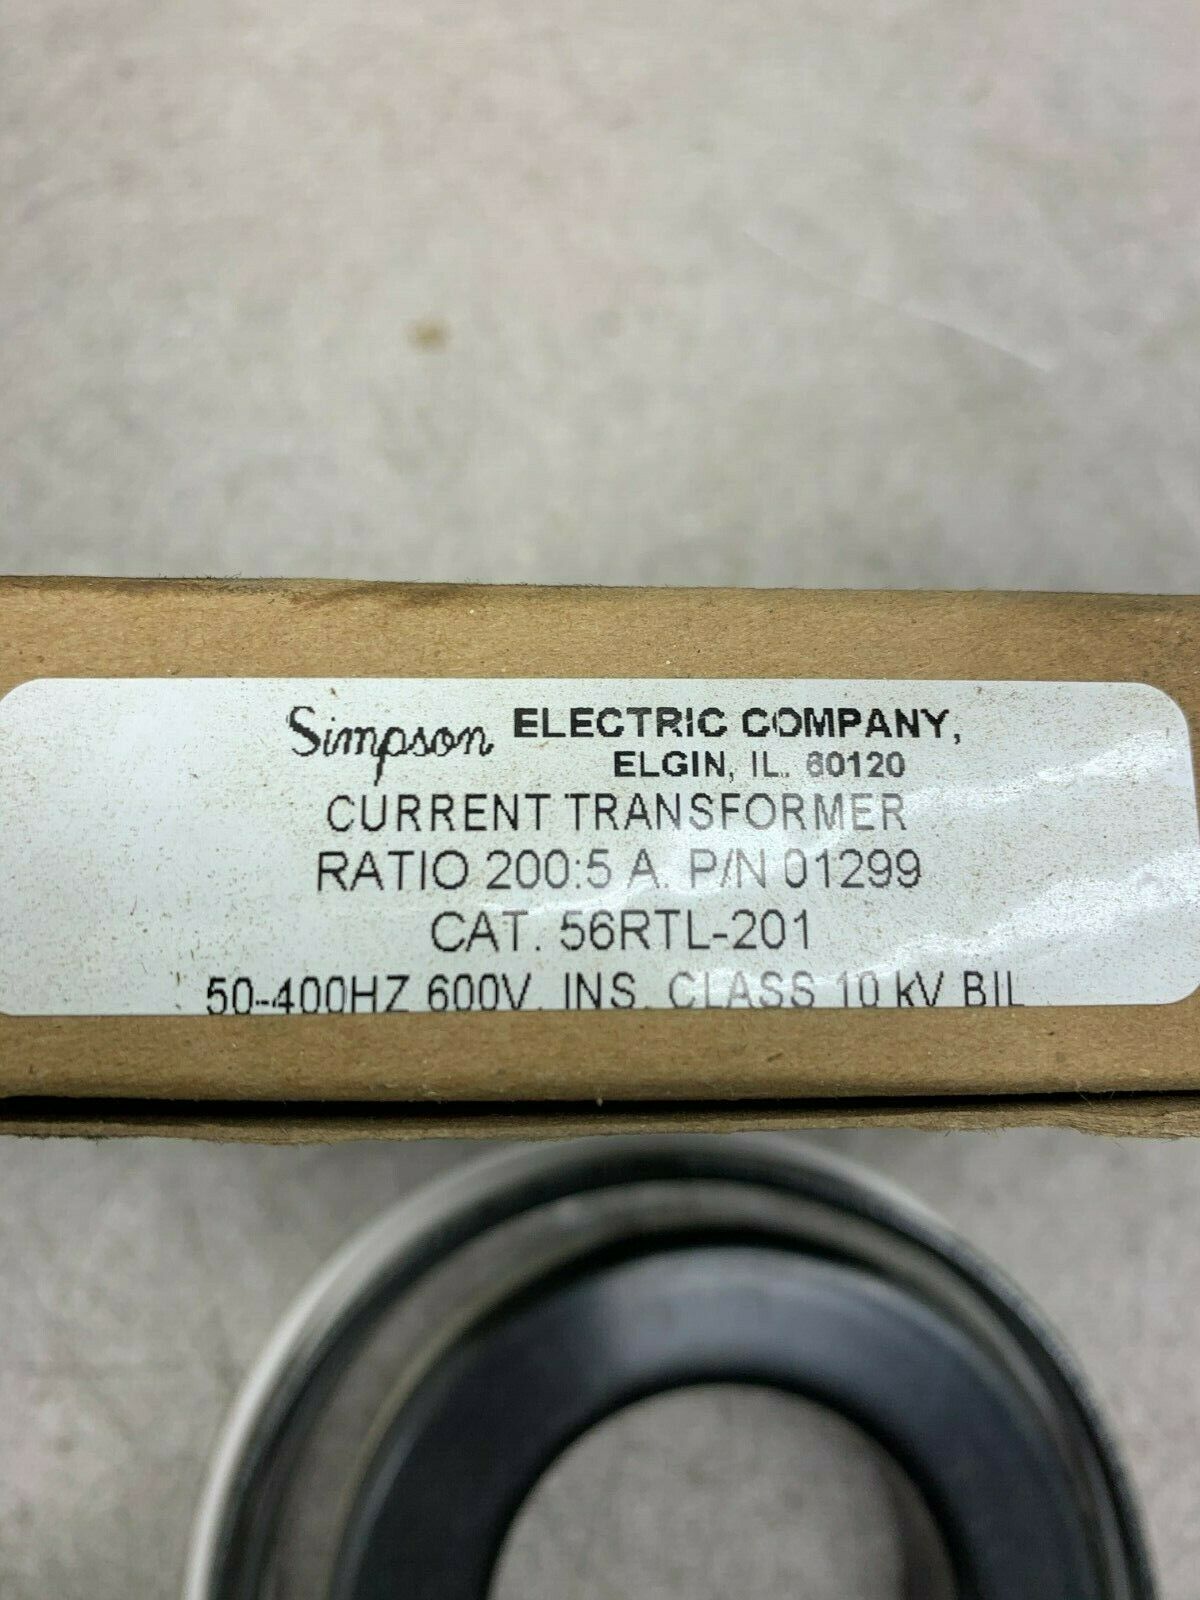 NEW IN BOX SIMPSON 56RTL-201 CURRENT TRANSFORMER 01299